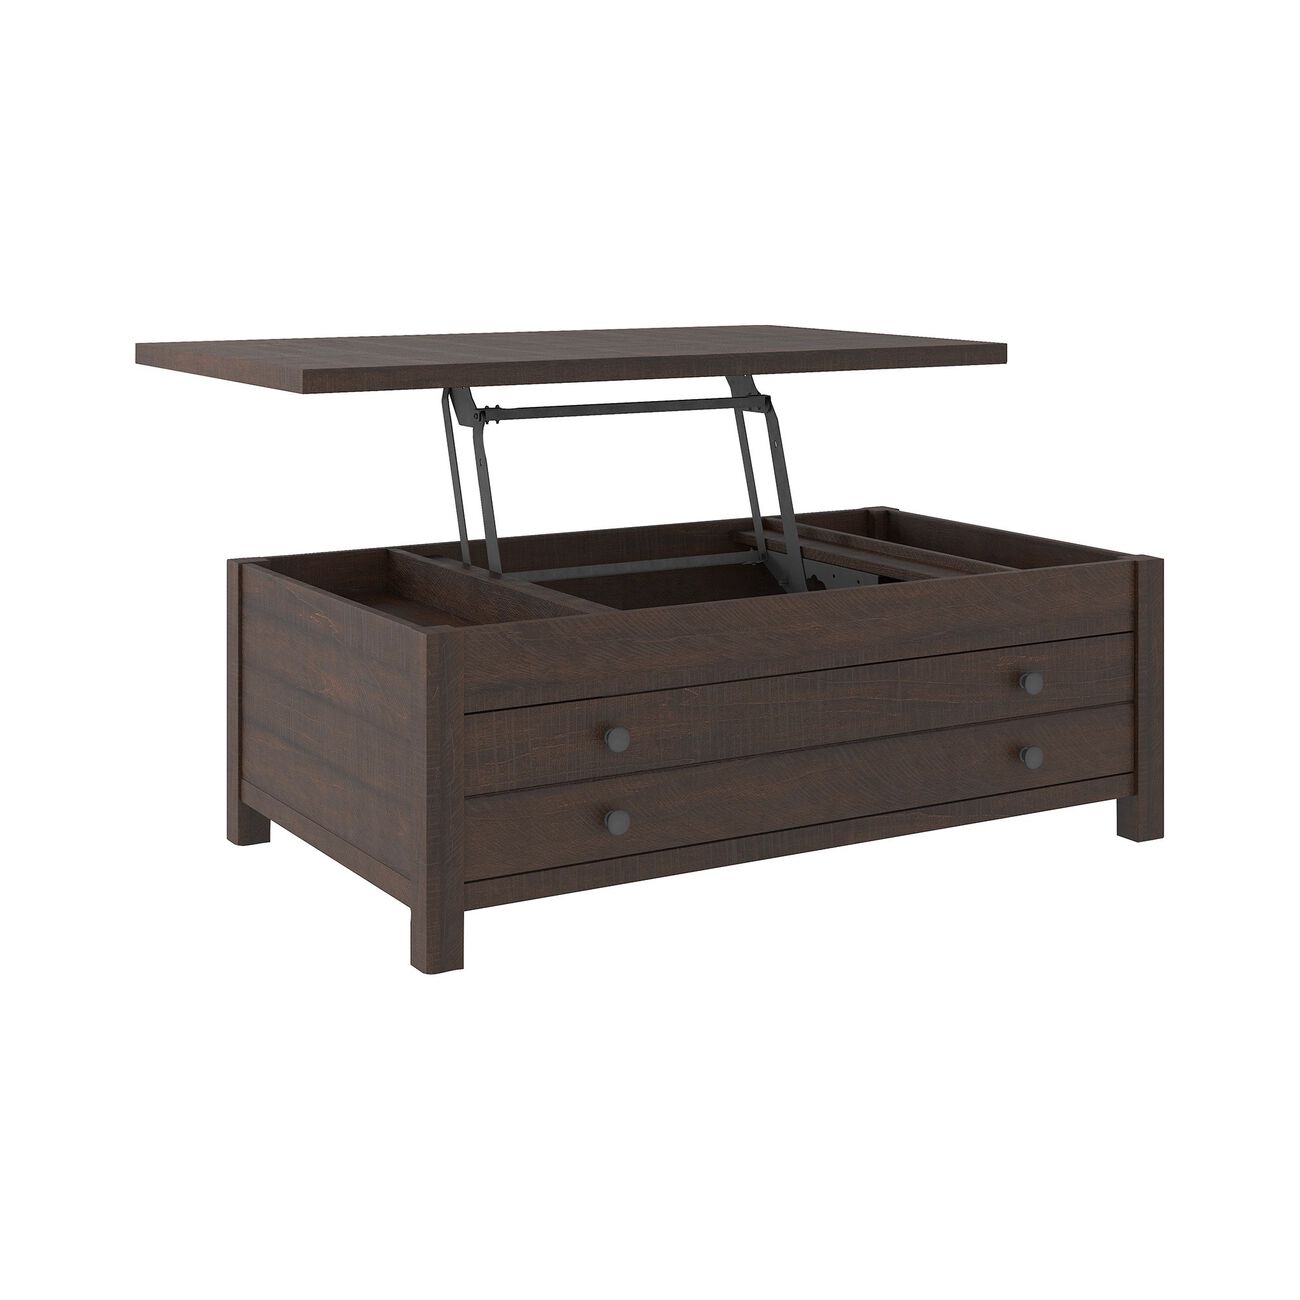 17 Inch 1 Drawer Lift Top Wooden Cocktail Table, Brown